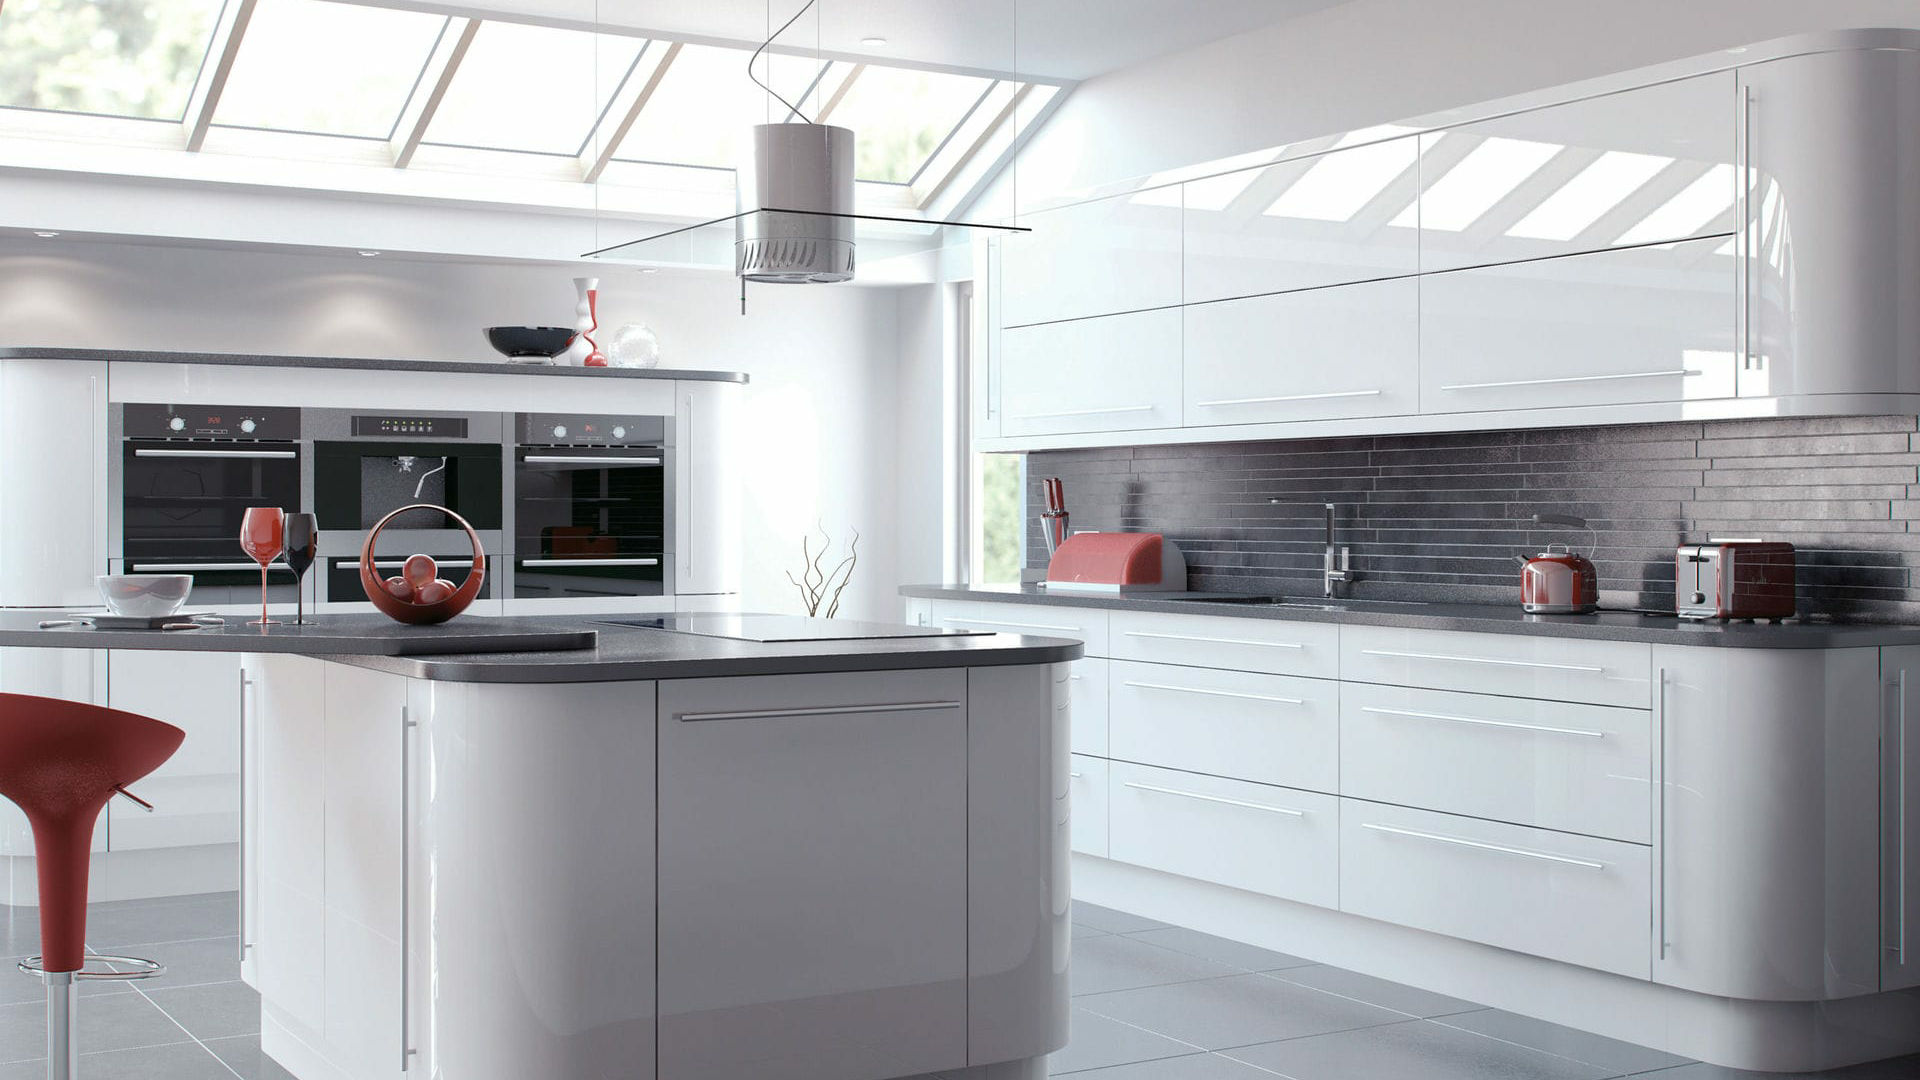 High gloss white kitchen, reflecting light beautifully to brighten any kitchen space